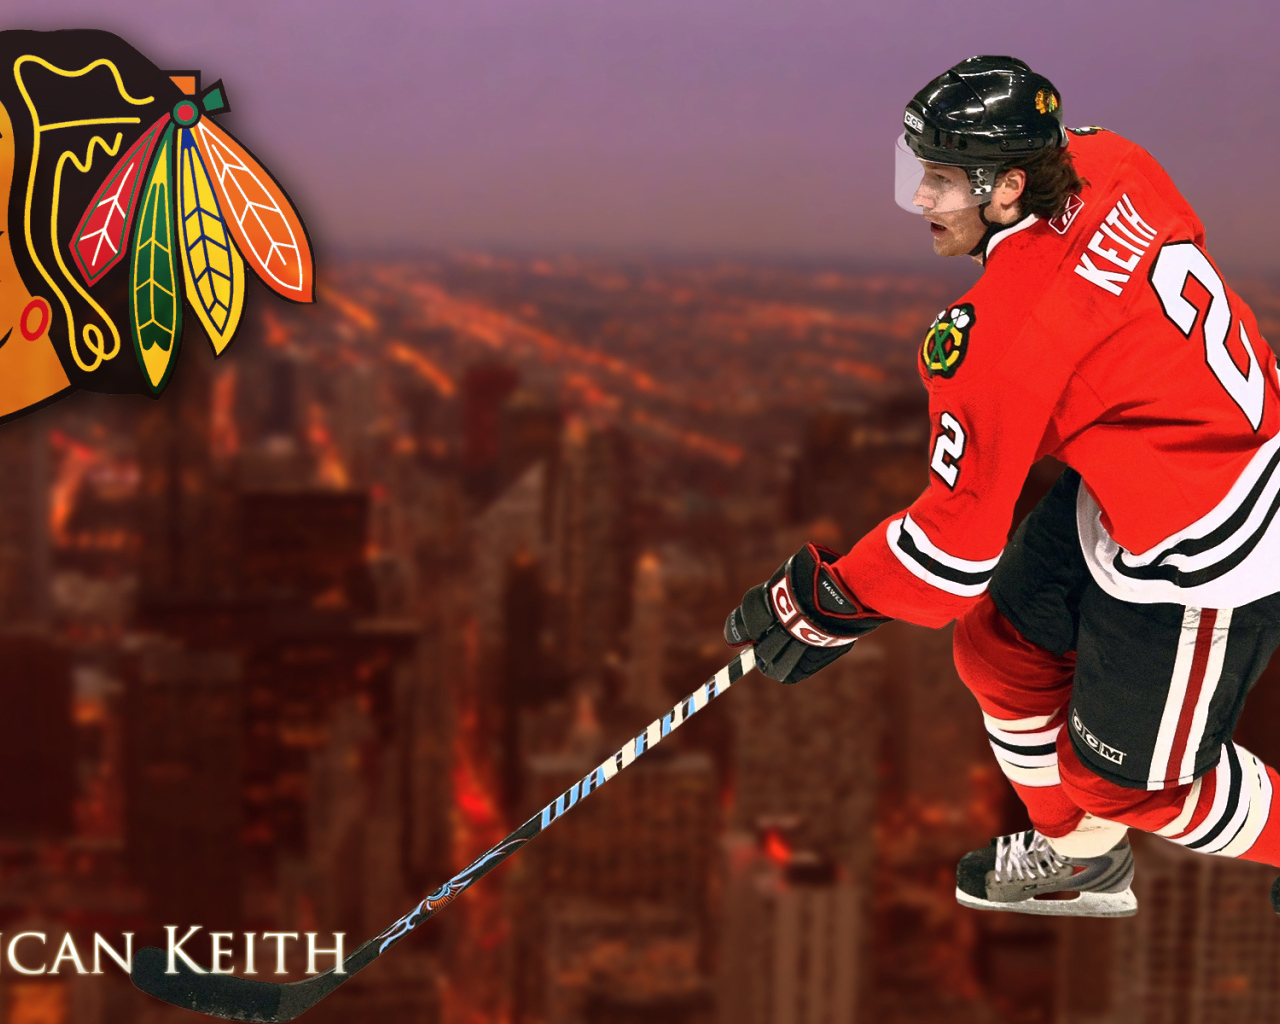 Famous Hockey player Duncan Keith